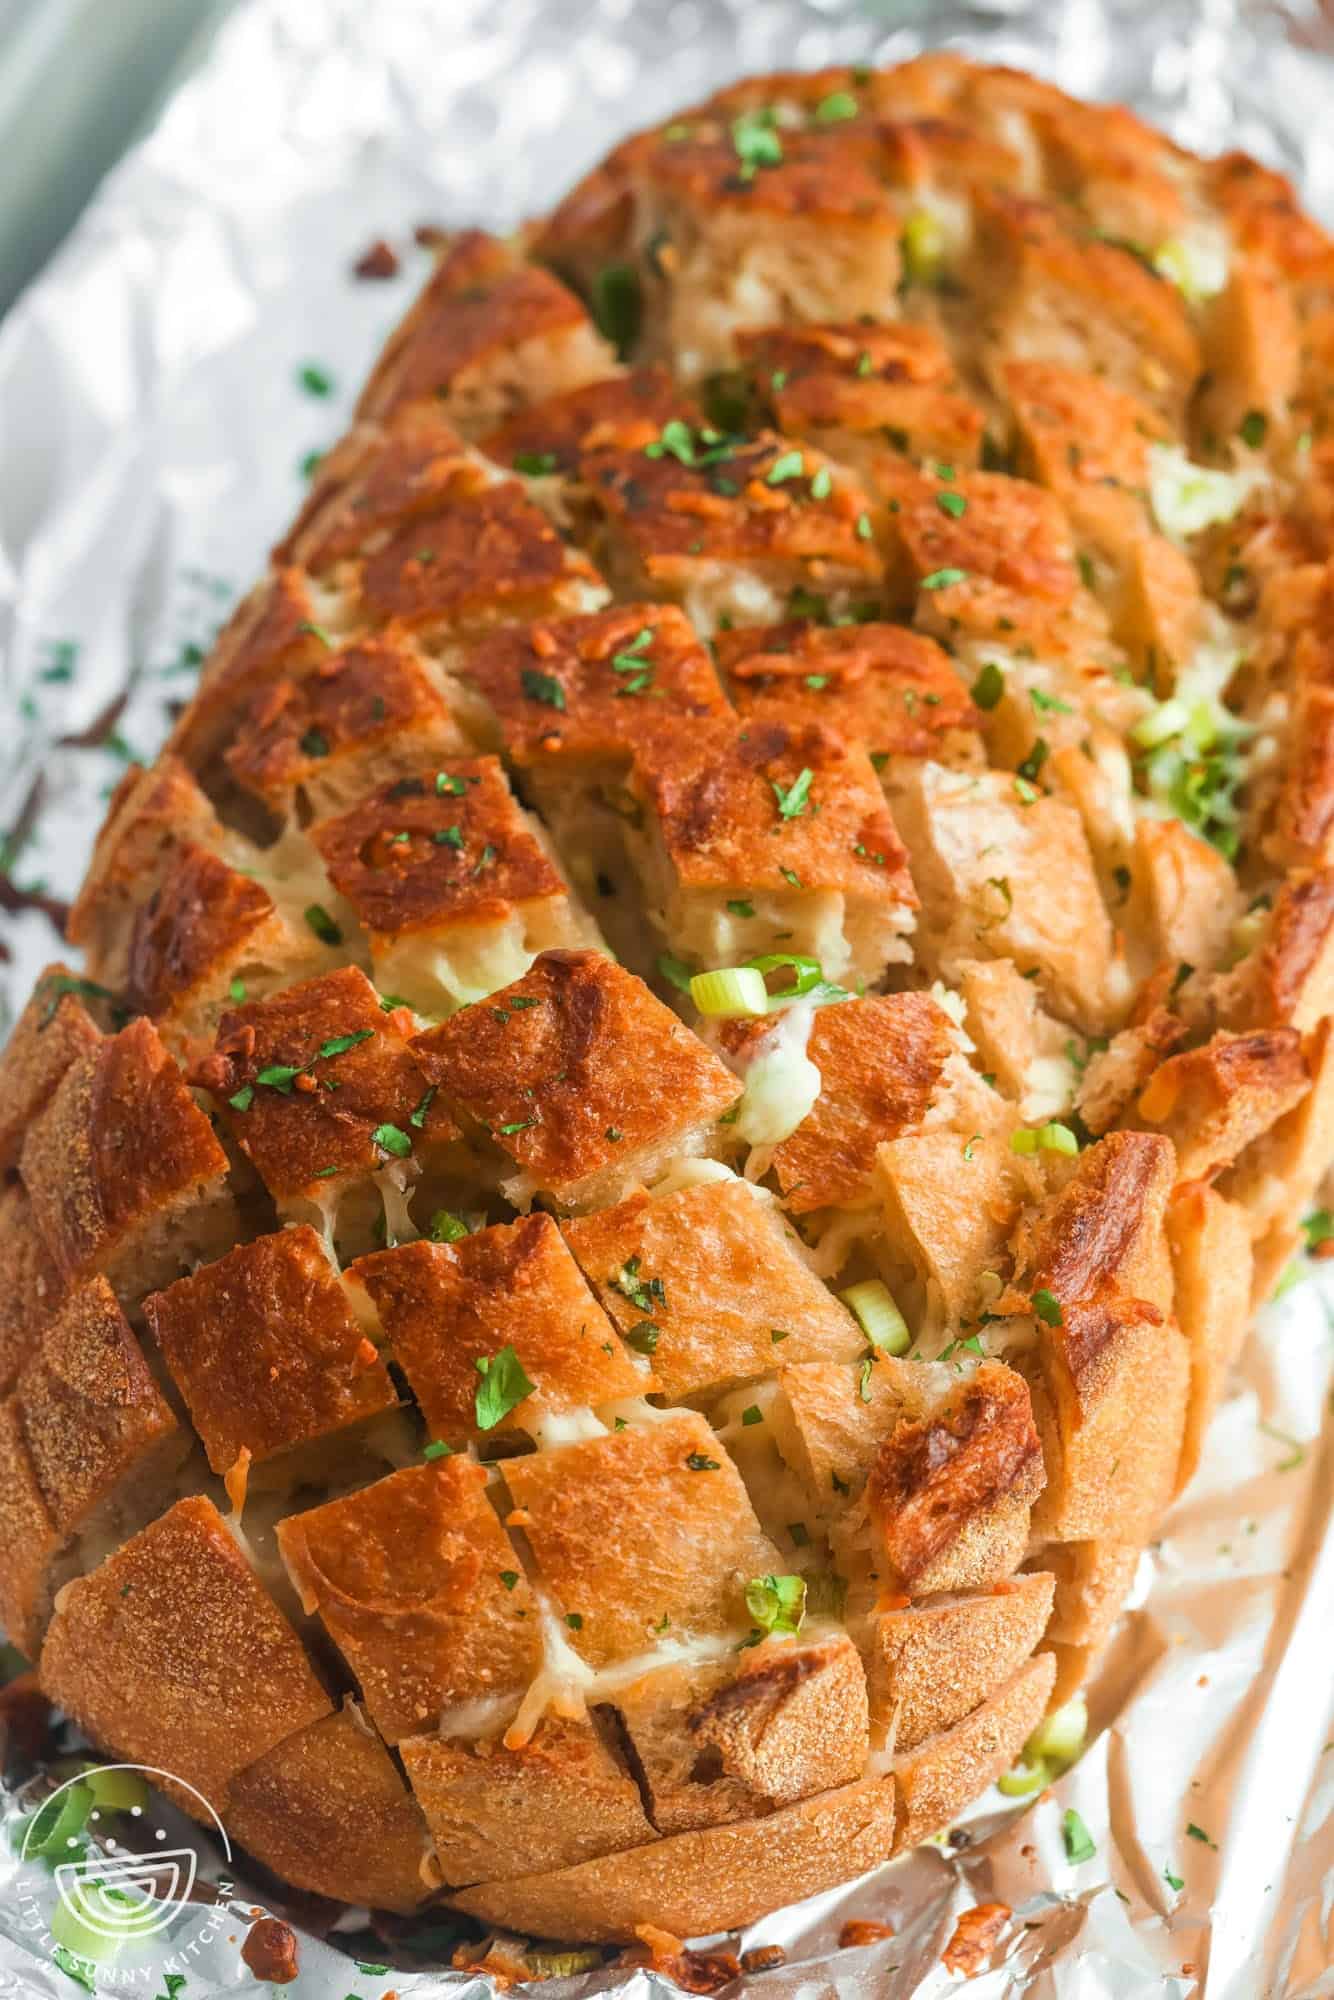 baked cheesy pull apart bread with garlic